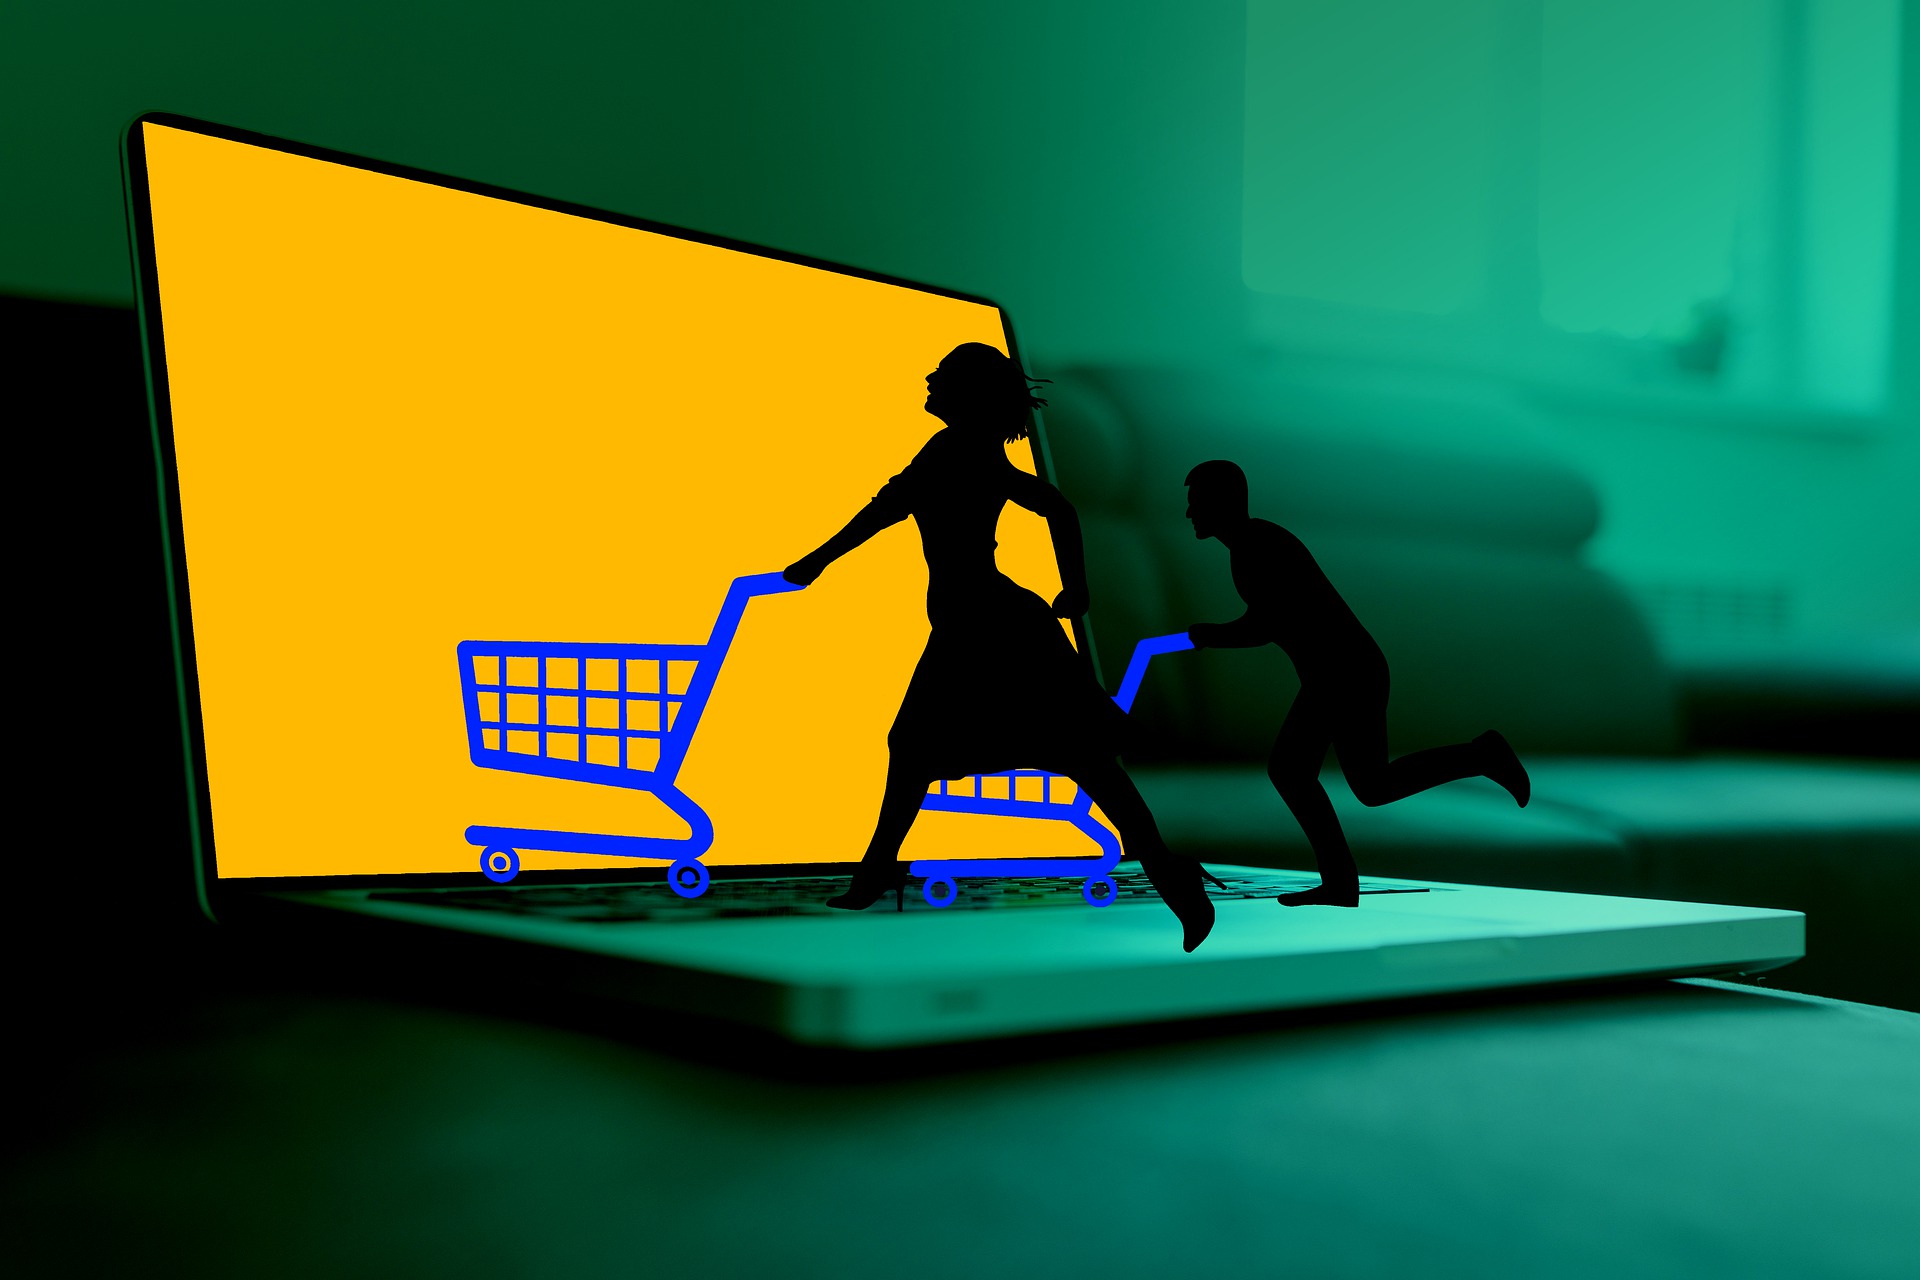 Online shopping significantly increases in Greece